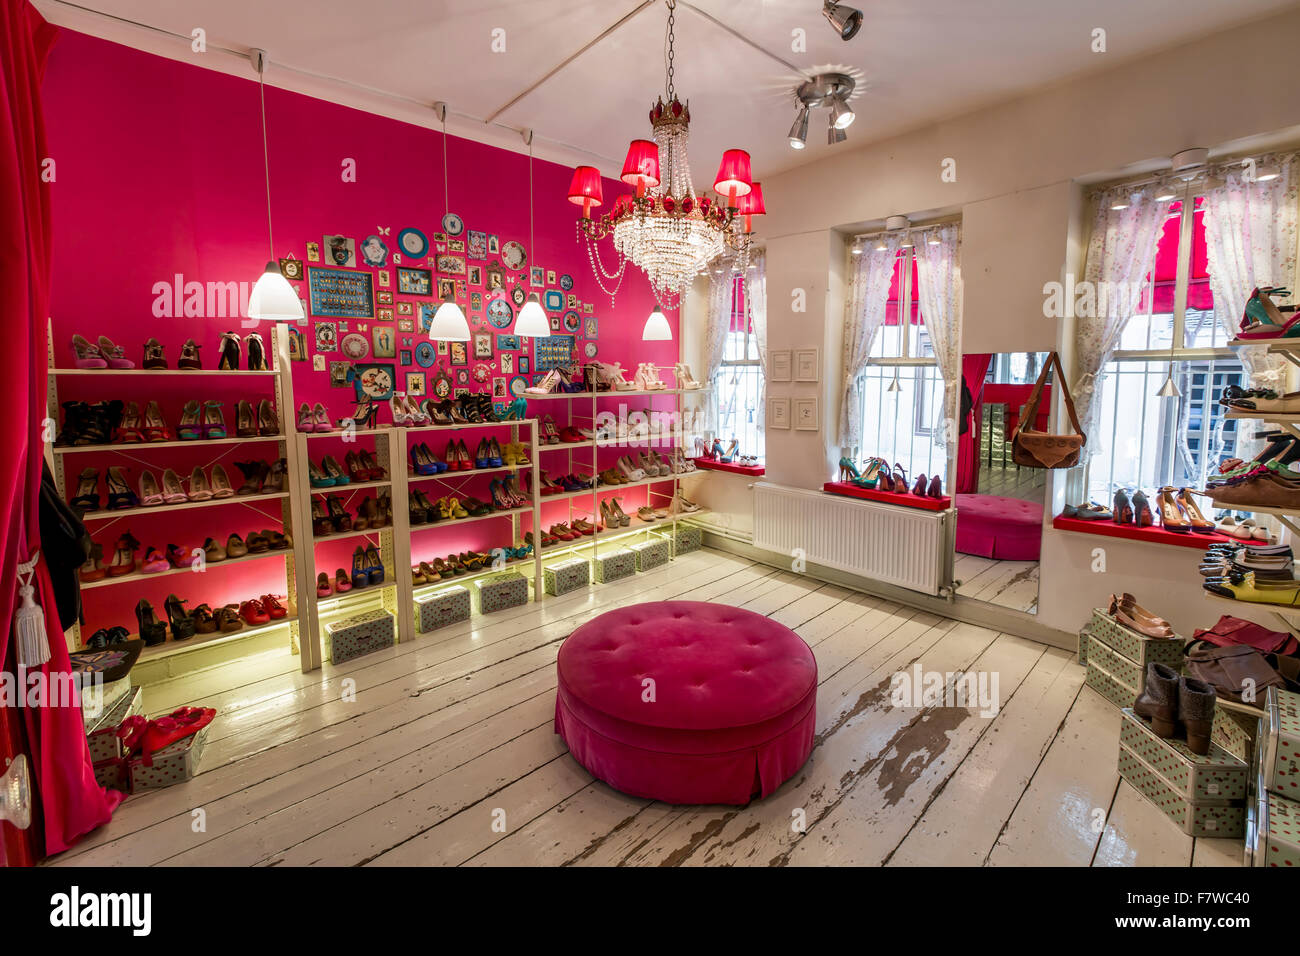 Shoe Store High Resolution Stock Photography and Images - Alamy